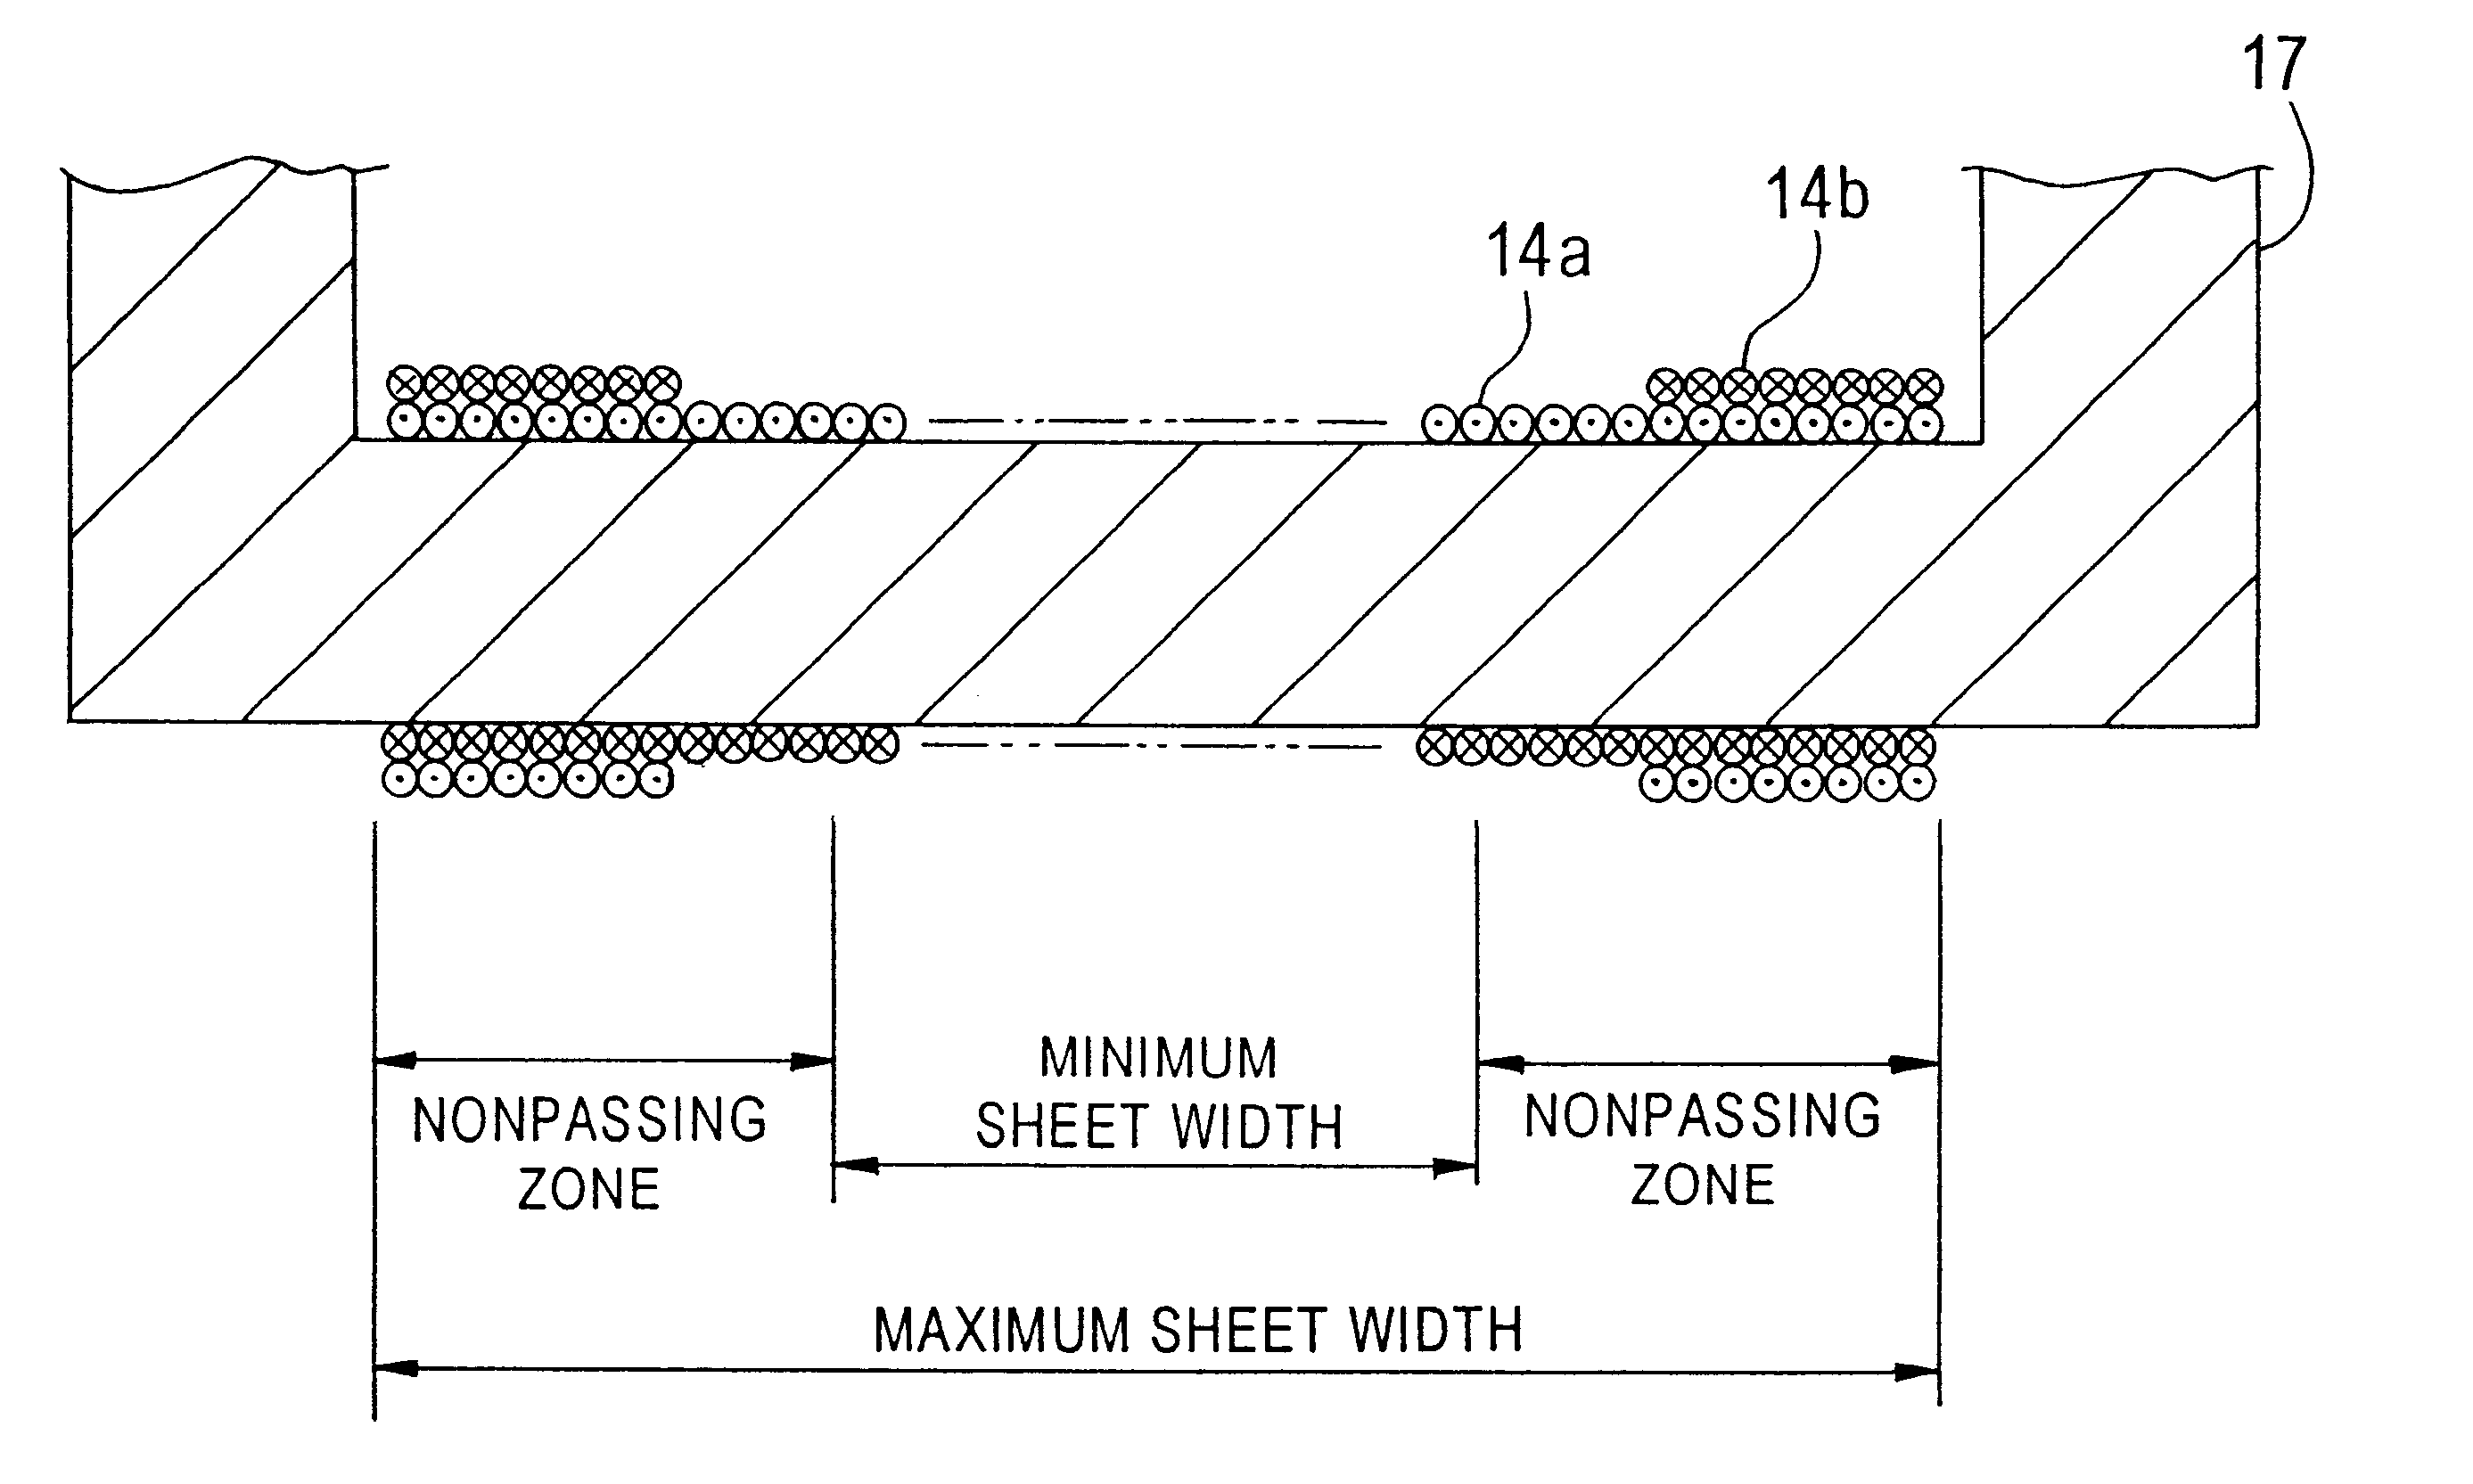 Induction-heating fusion device